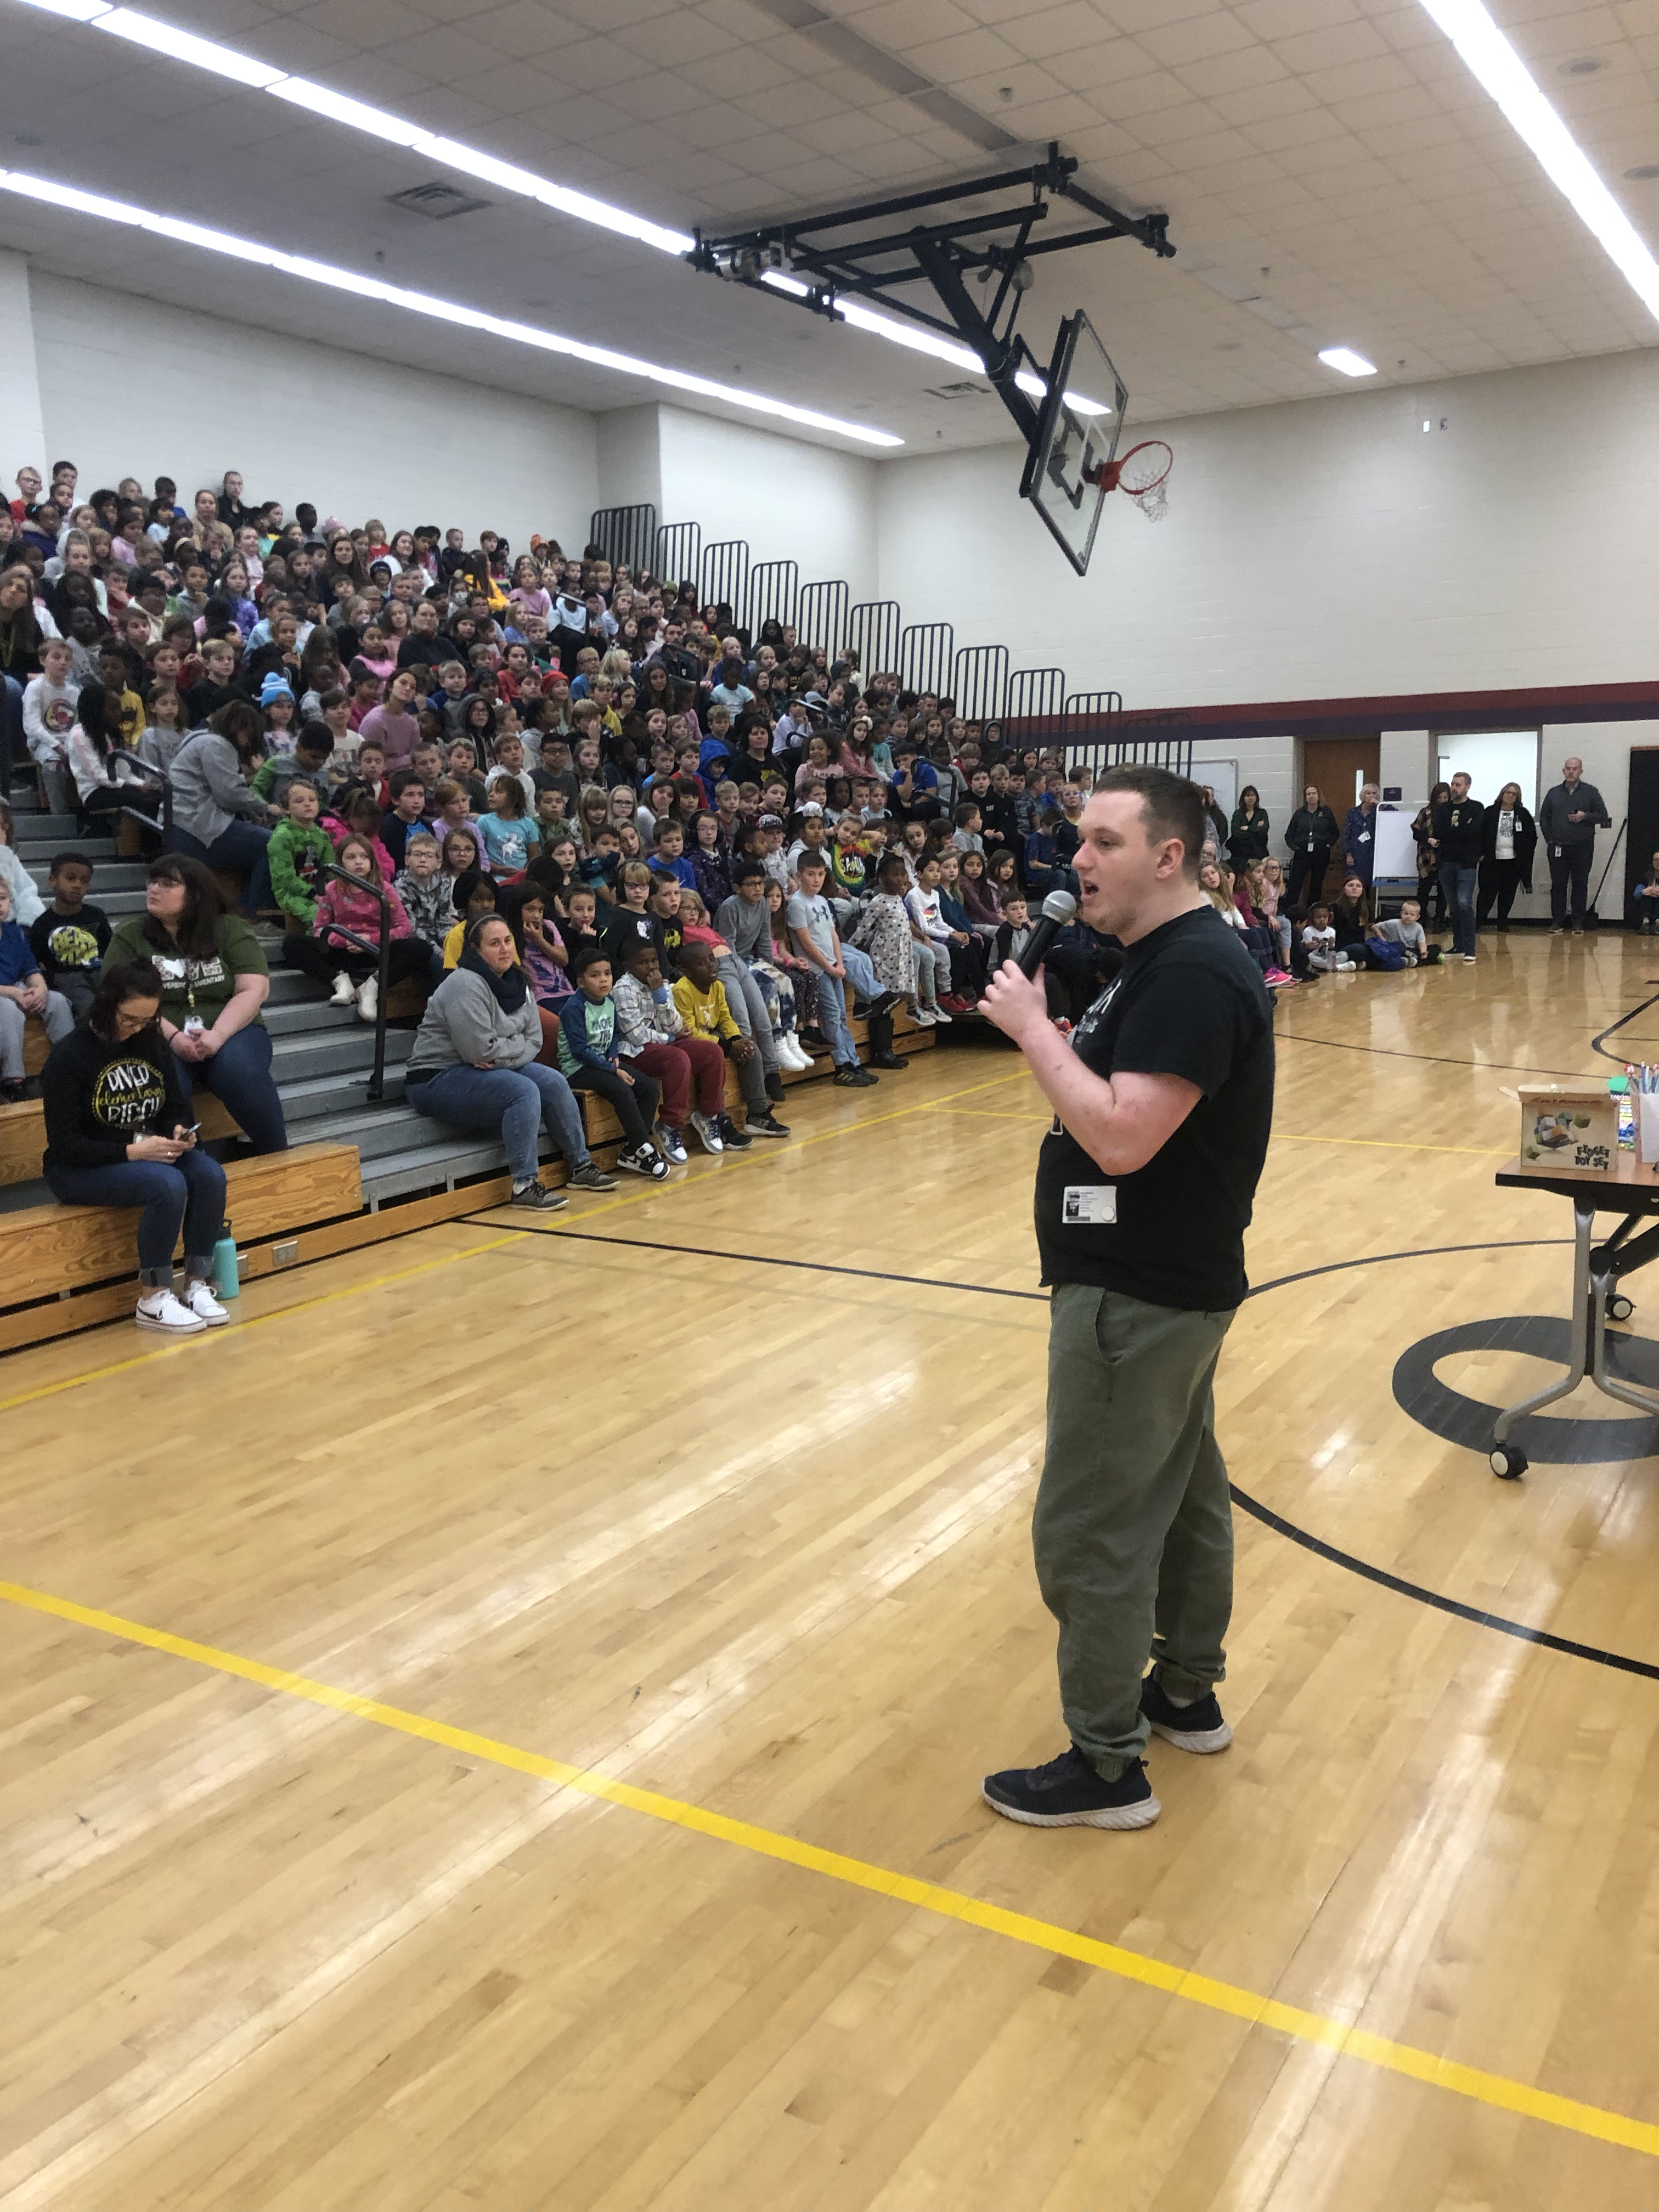 Sam stands in the middle of a full gymnasium, speaking into a microphone to a crowd of teenagers.